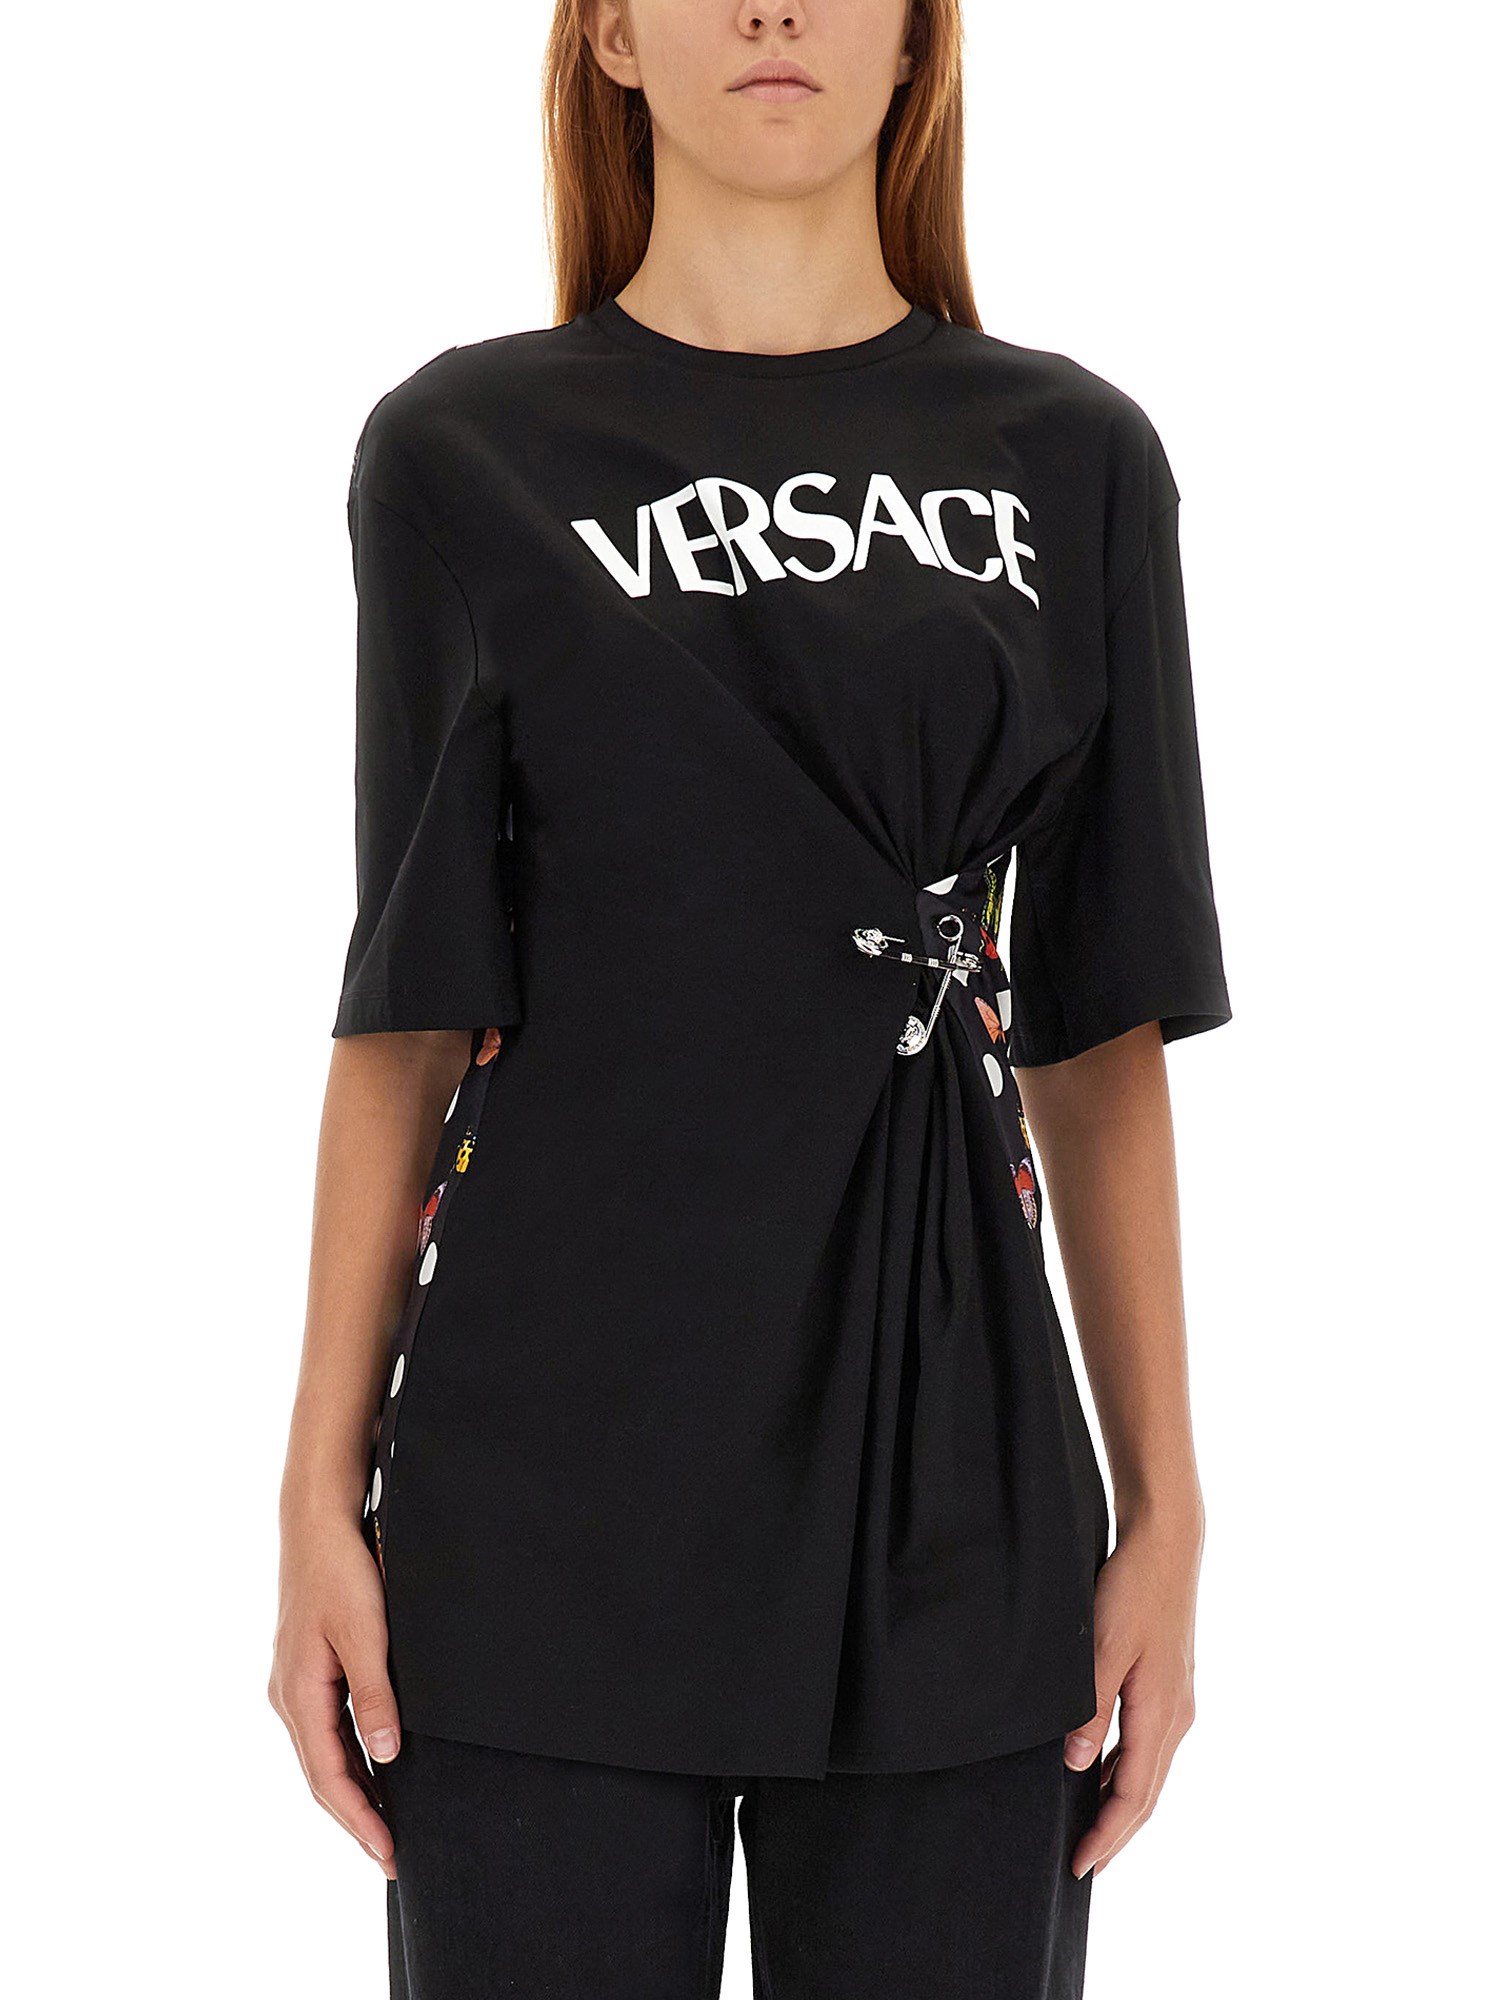 versace t-shirt with butterflies and safety pin logo